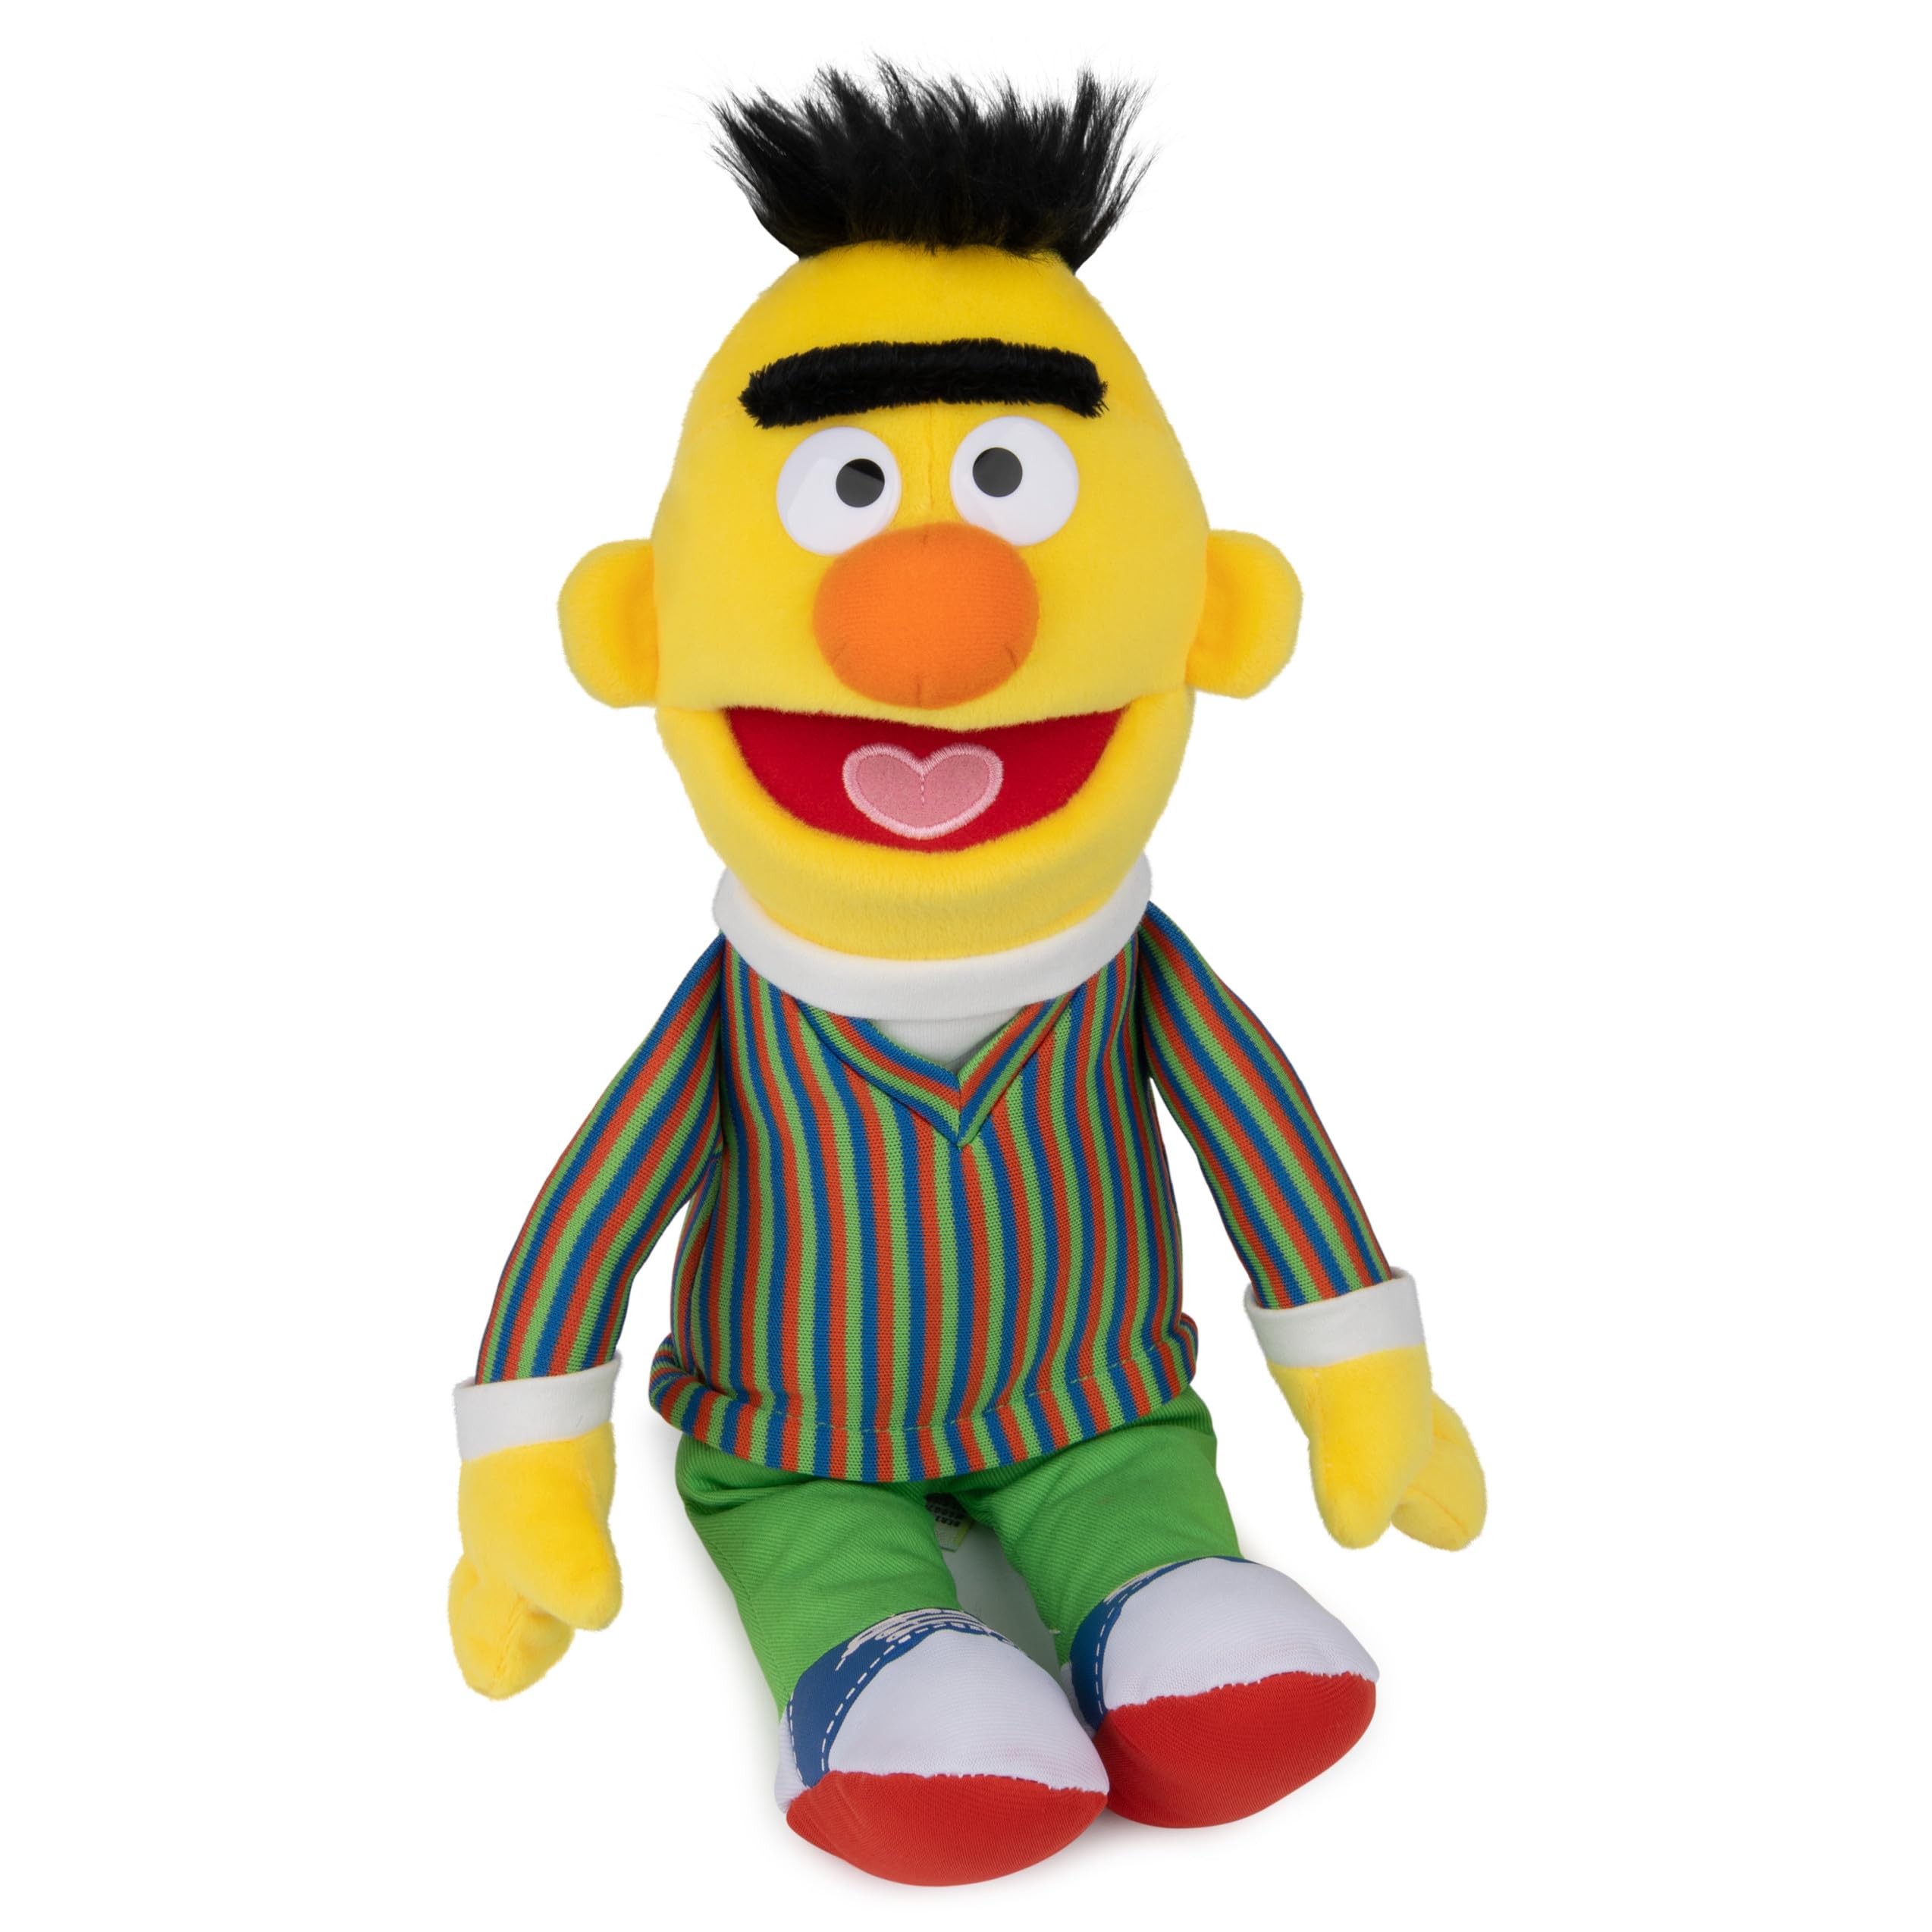 14” GUND Sesame Street Official Bert Muppet Plush, Premium Plush Toy for Ages 1 & Up, Yellow $9.62 +Free Shipping w/Prime